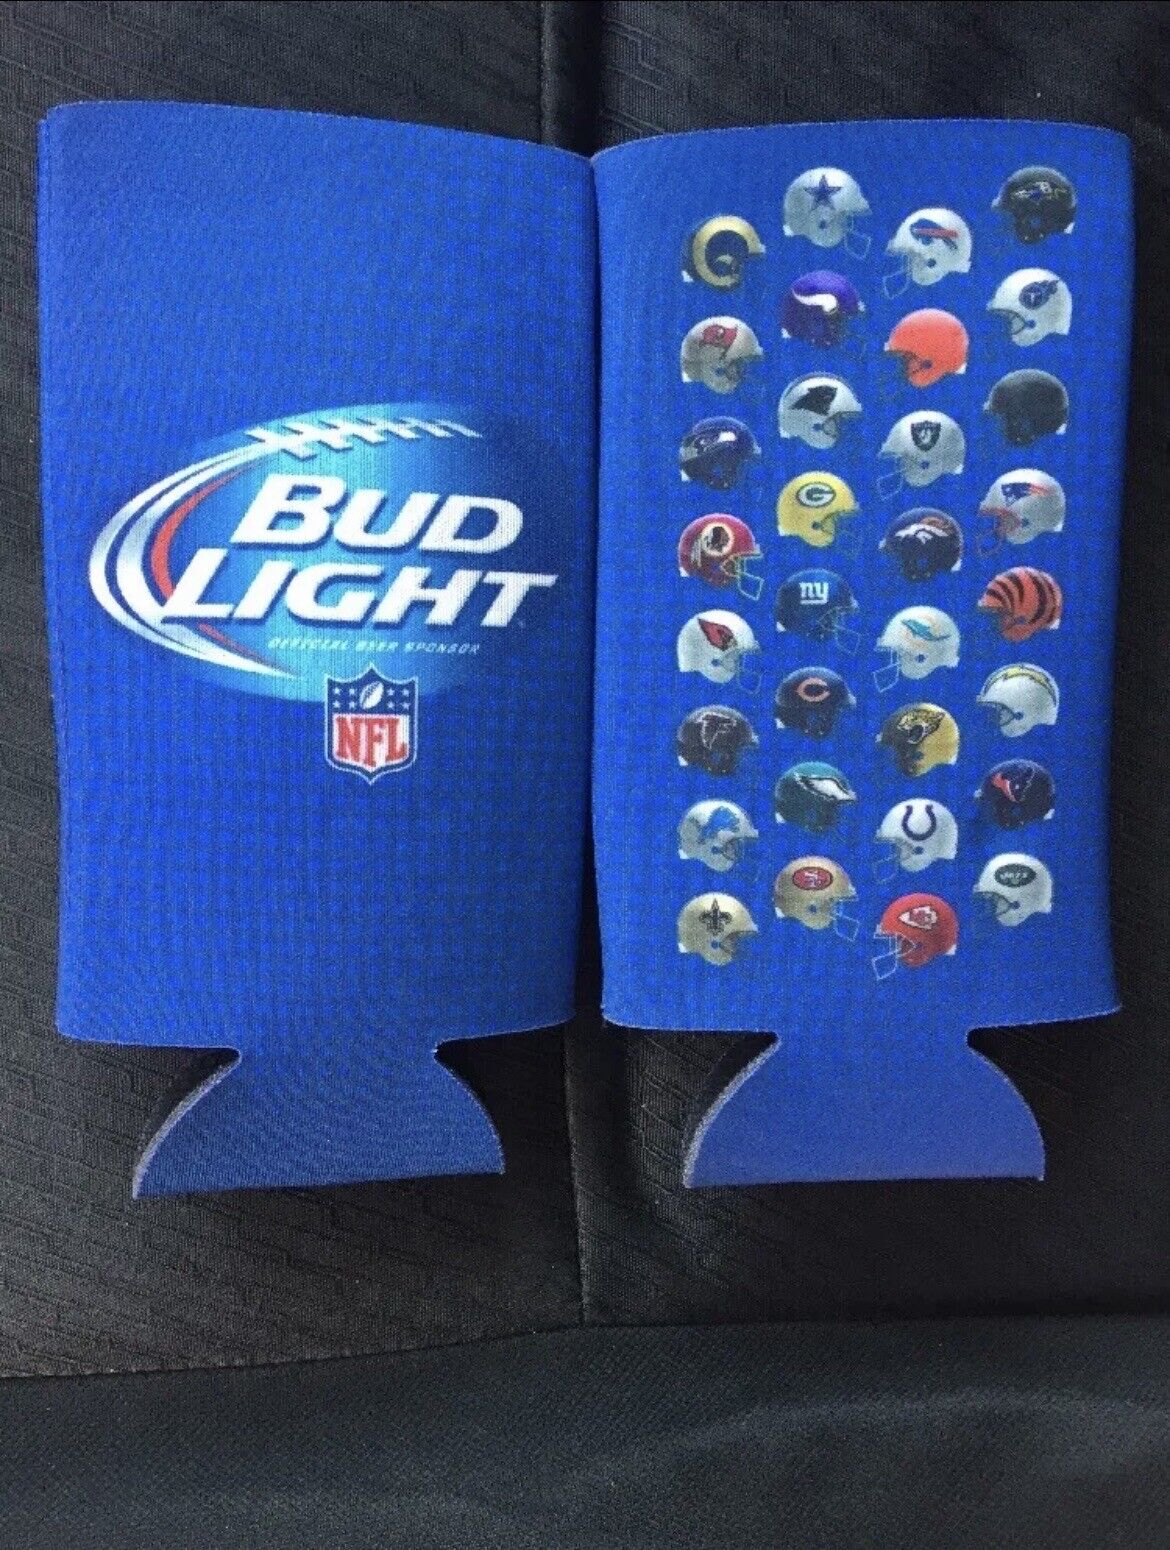 New 12 Authentic NFL Bud Light 24/25oz Beer Bottle Can Koozie Coozie